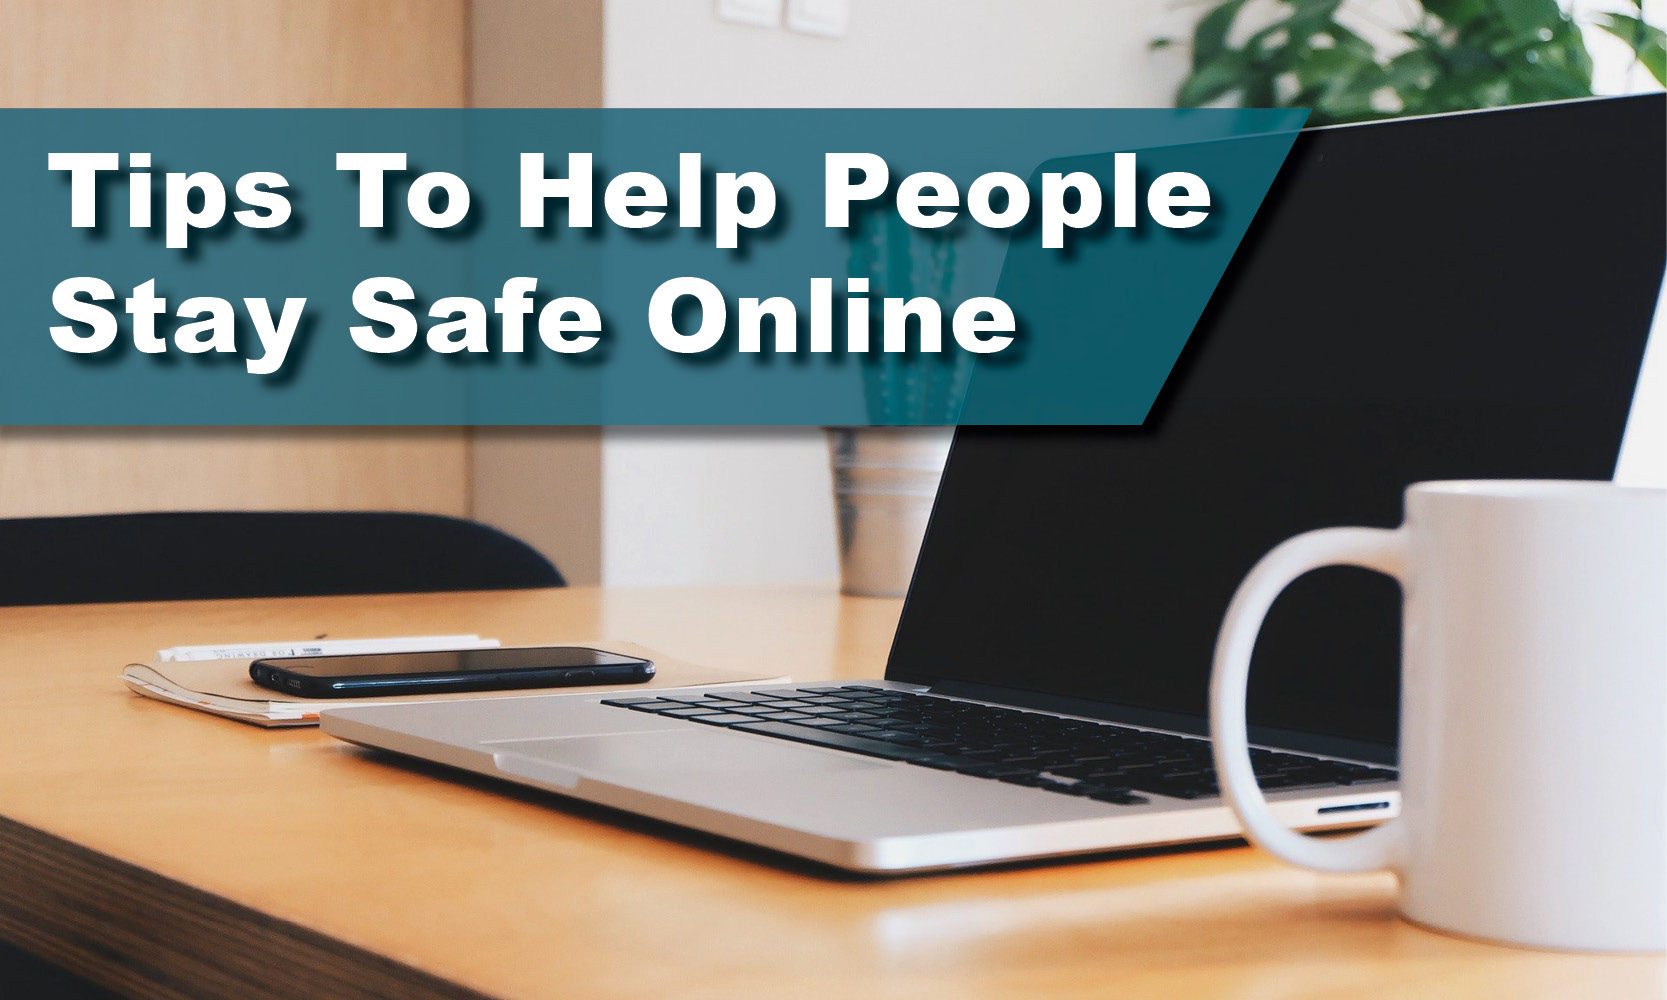 Tips to help people stay safe online